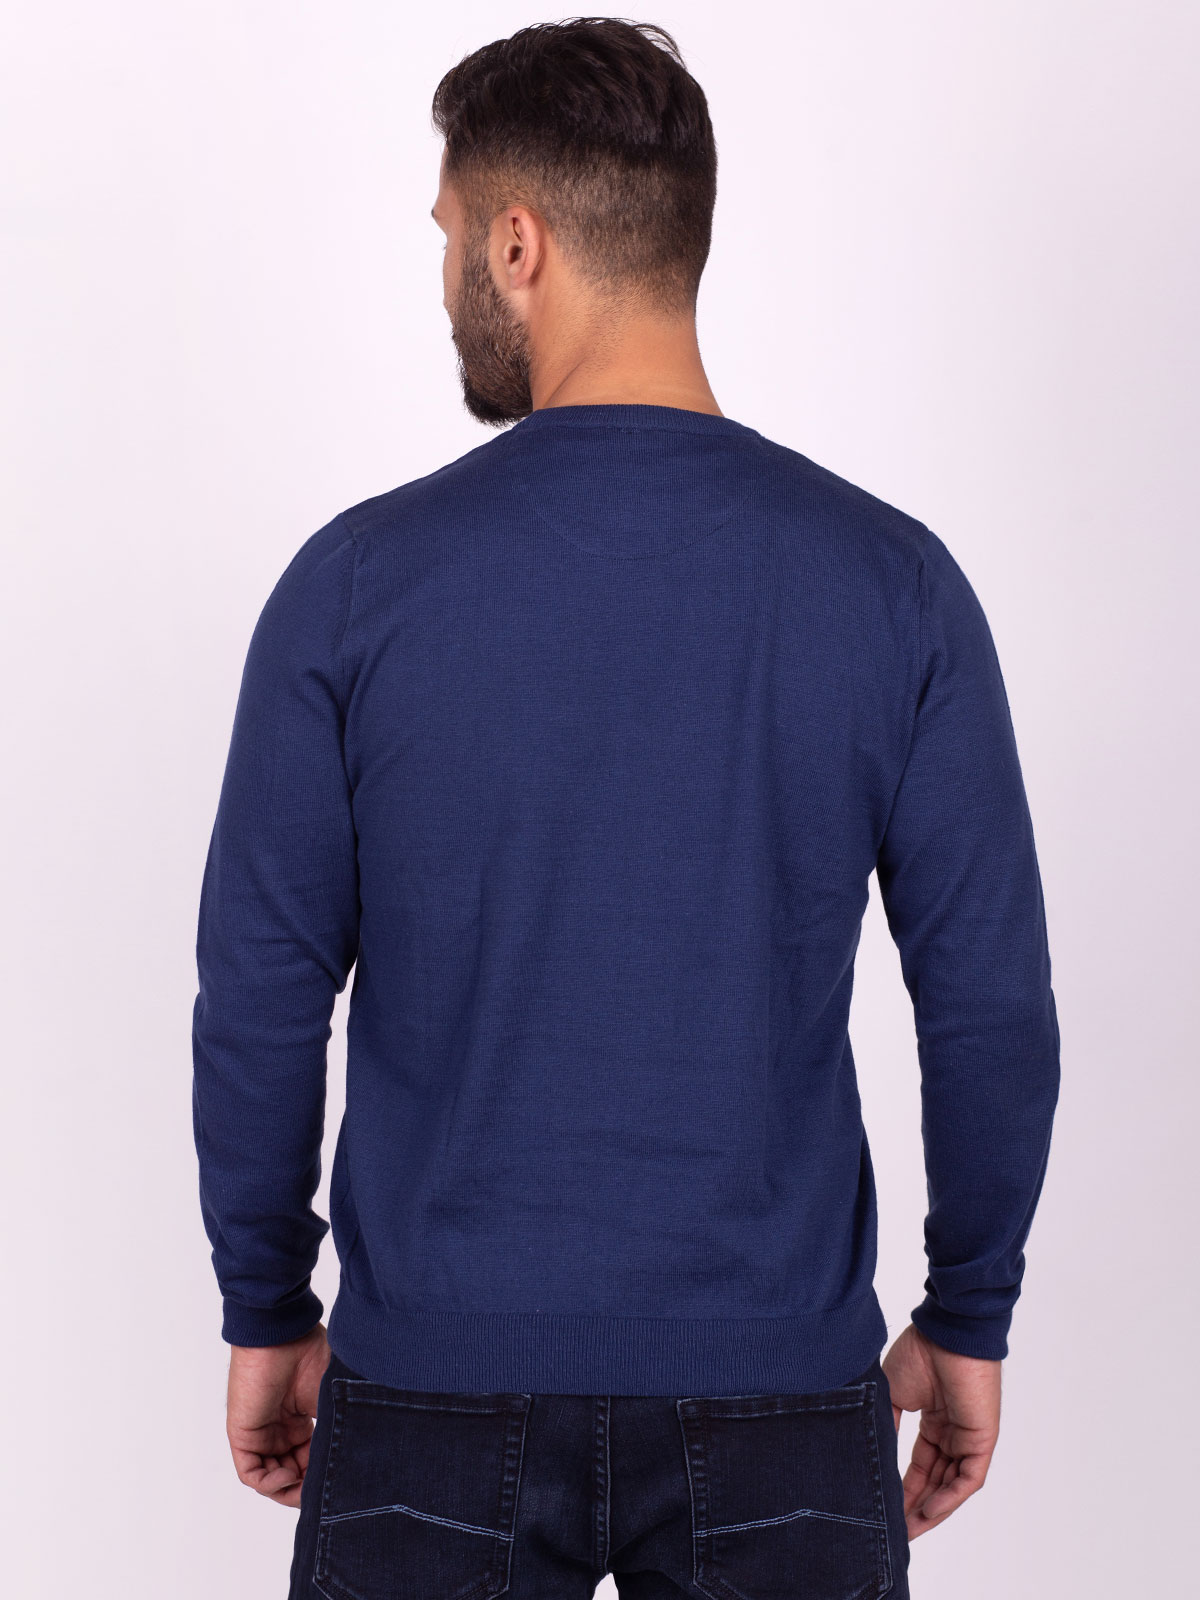 Ink blue sweater - 35299 € 37.12 img4